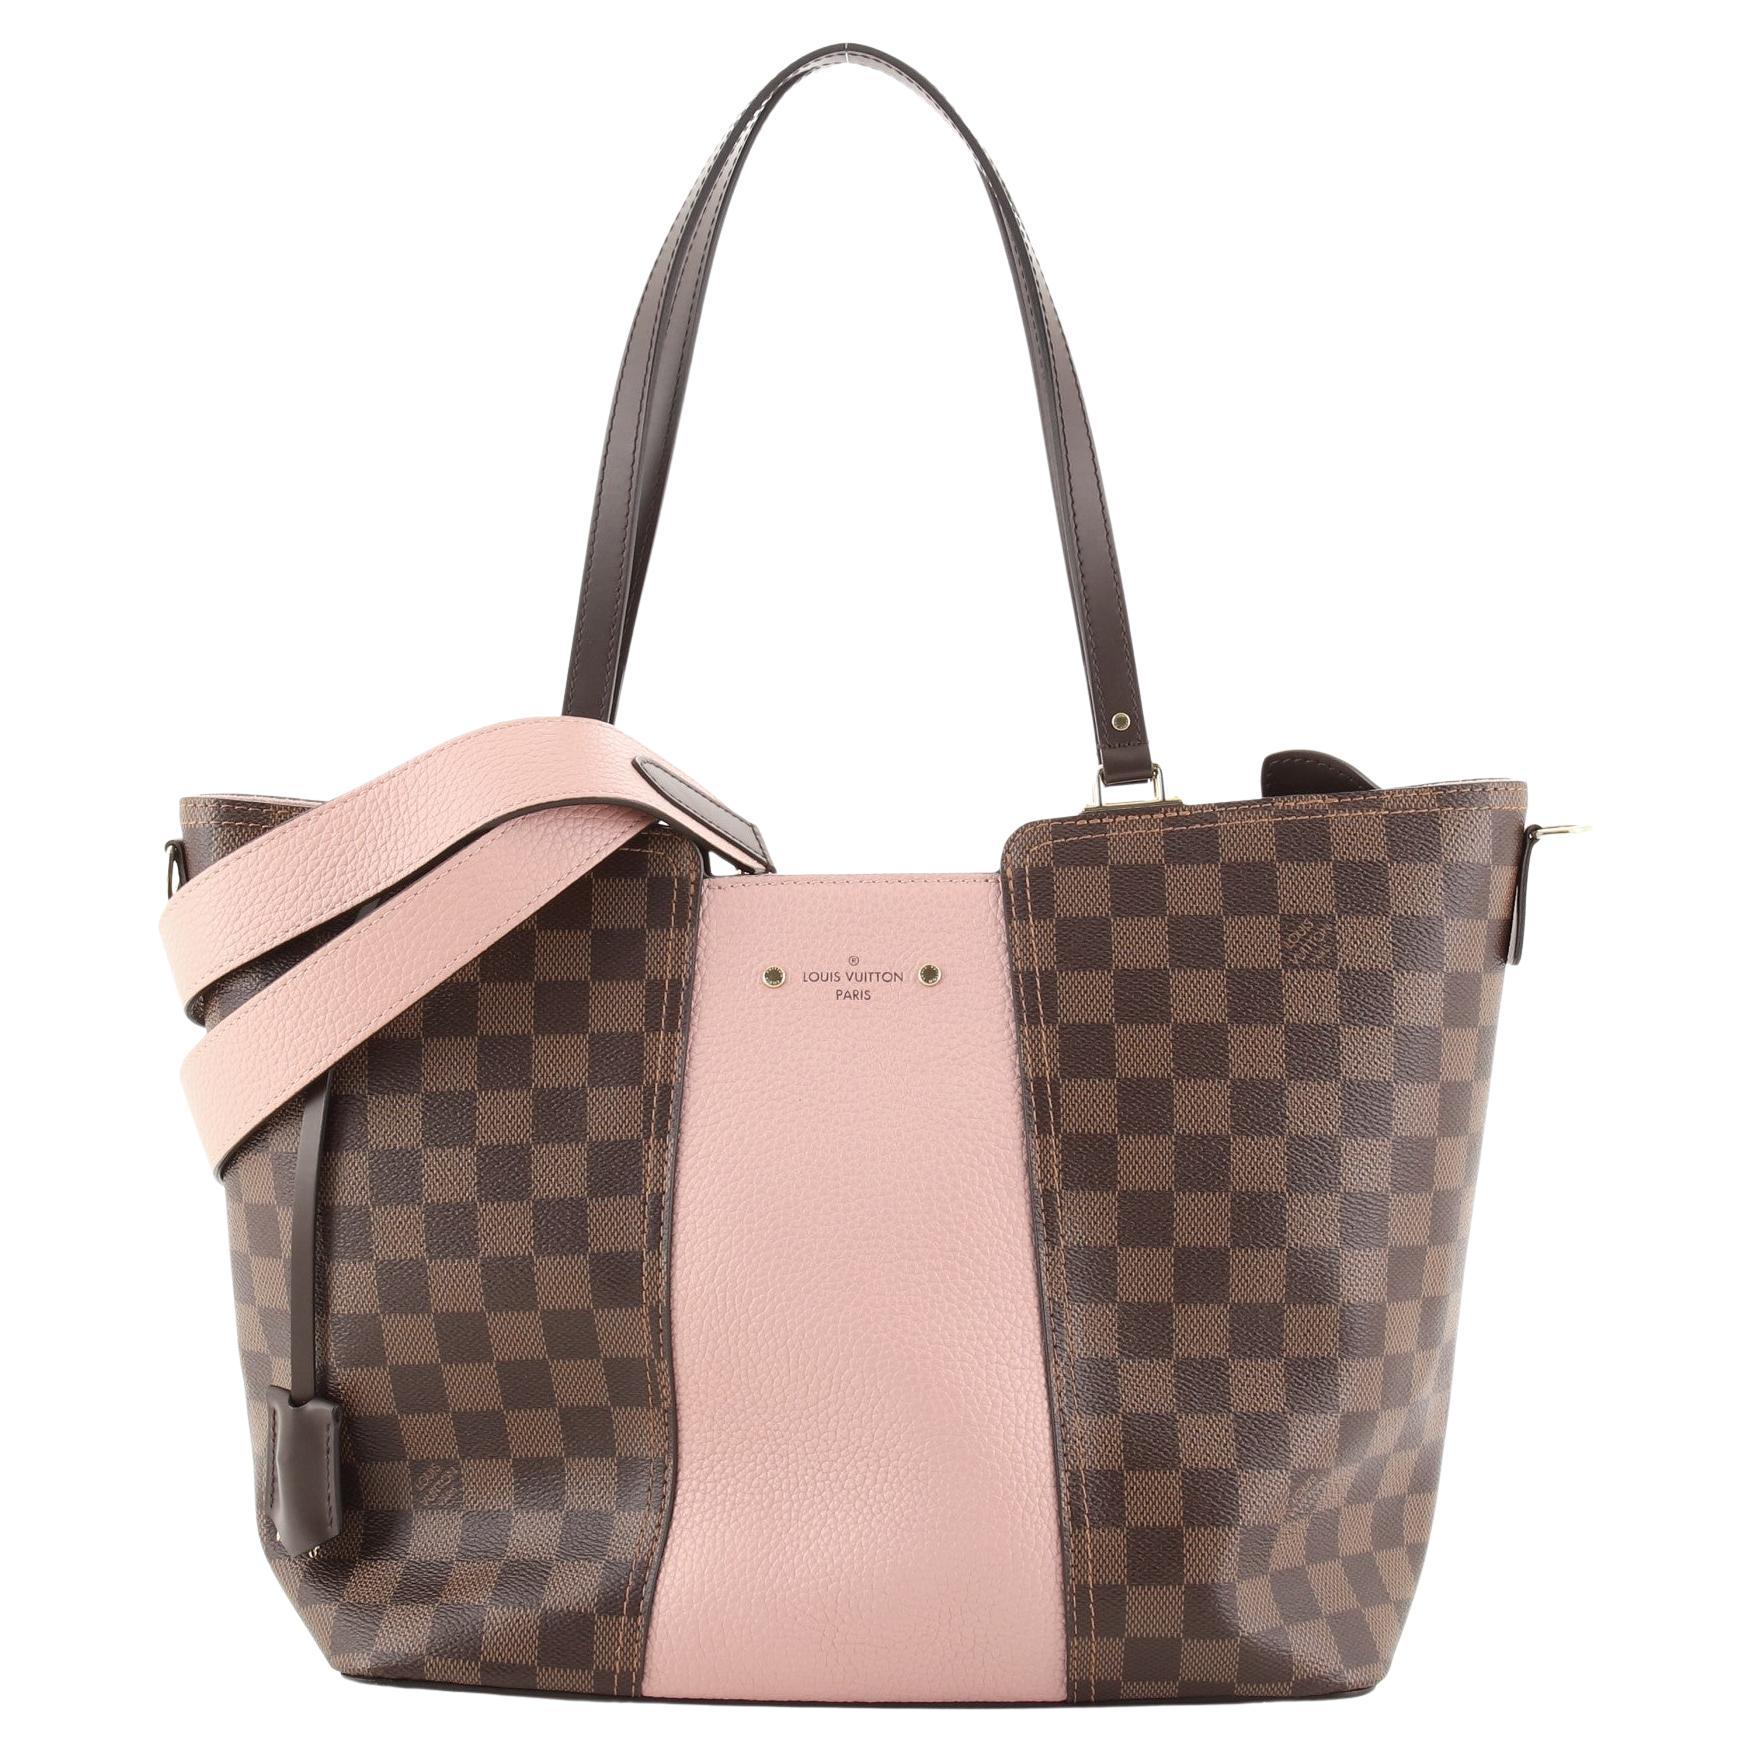 louis vuitton pink and brown bag